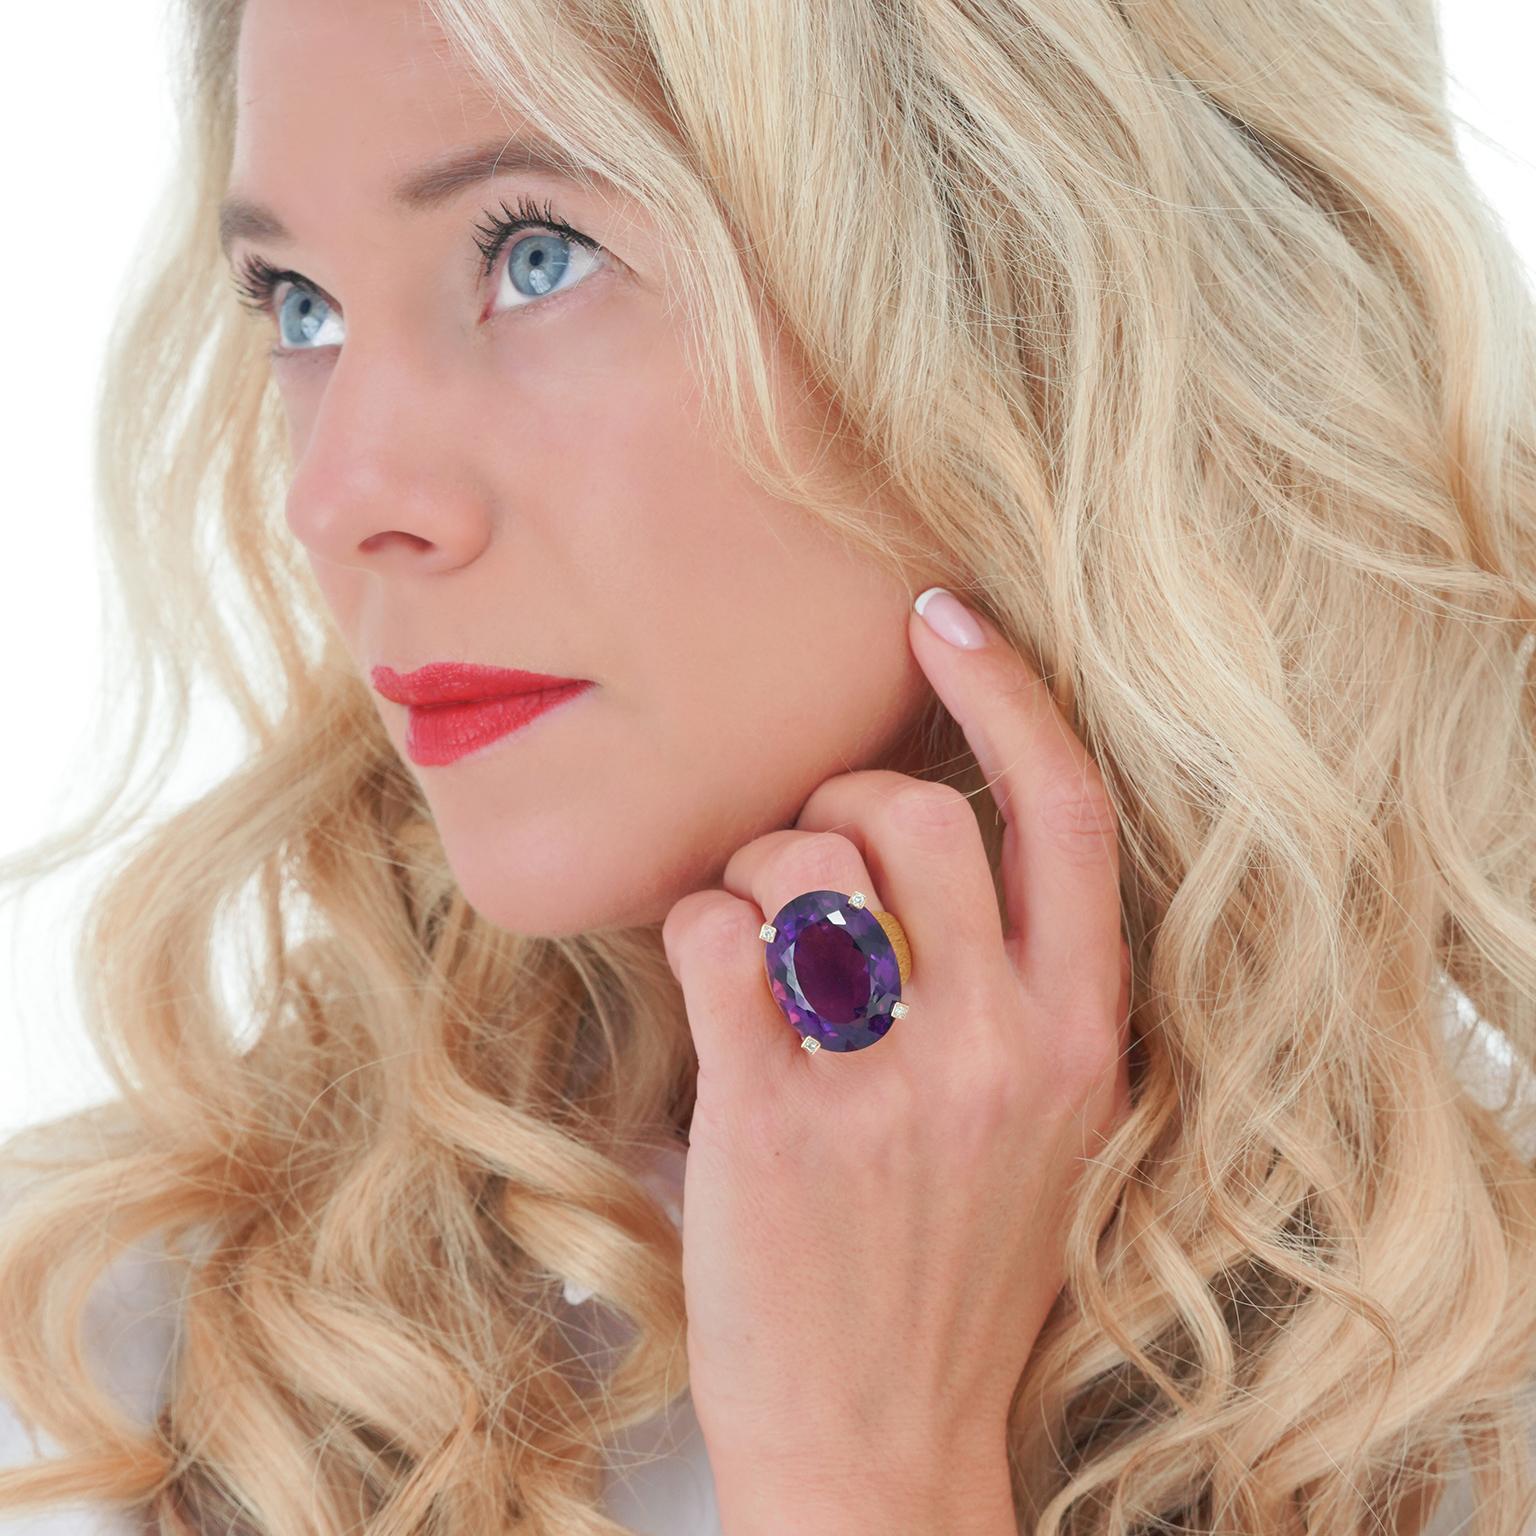 Circa 1970s, 18k, Switzerland.  This colorfully chic Modernist ring features a massive 40.0-carat amethyst. This gorgeous deeply-hued purple stone beautifully complements the minimalist contemporary design. The body of the ring is hand-textured and